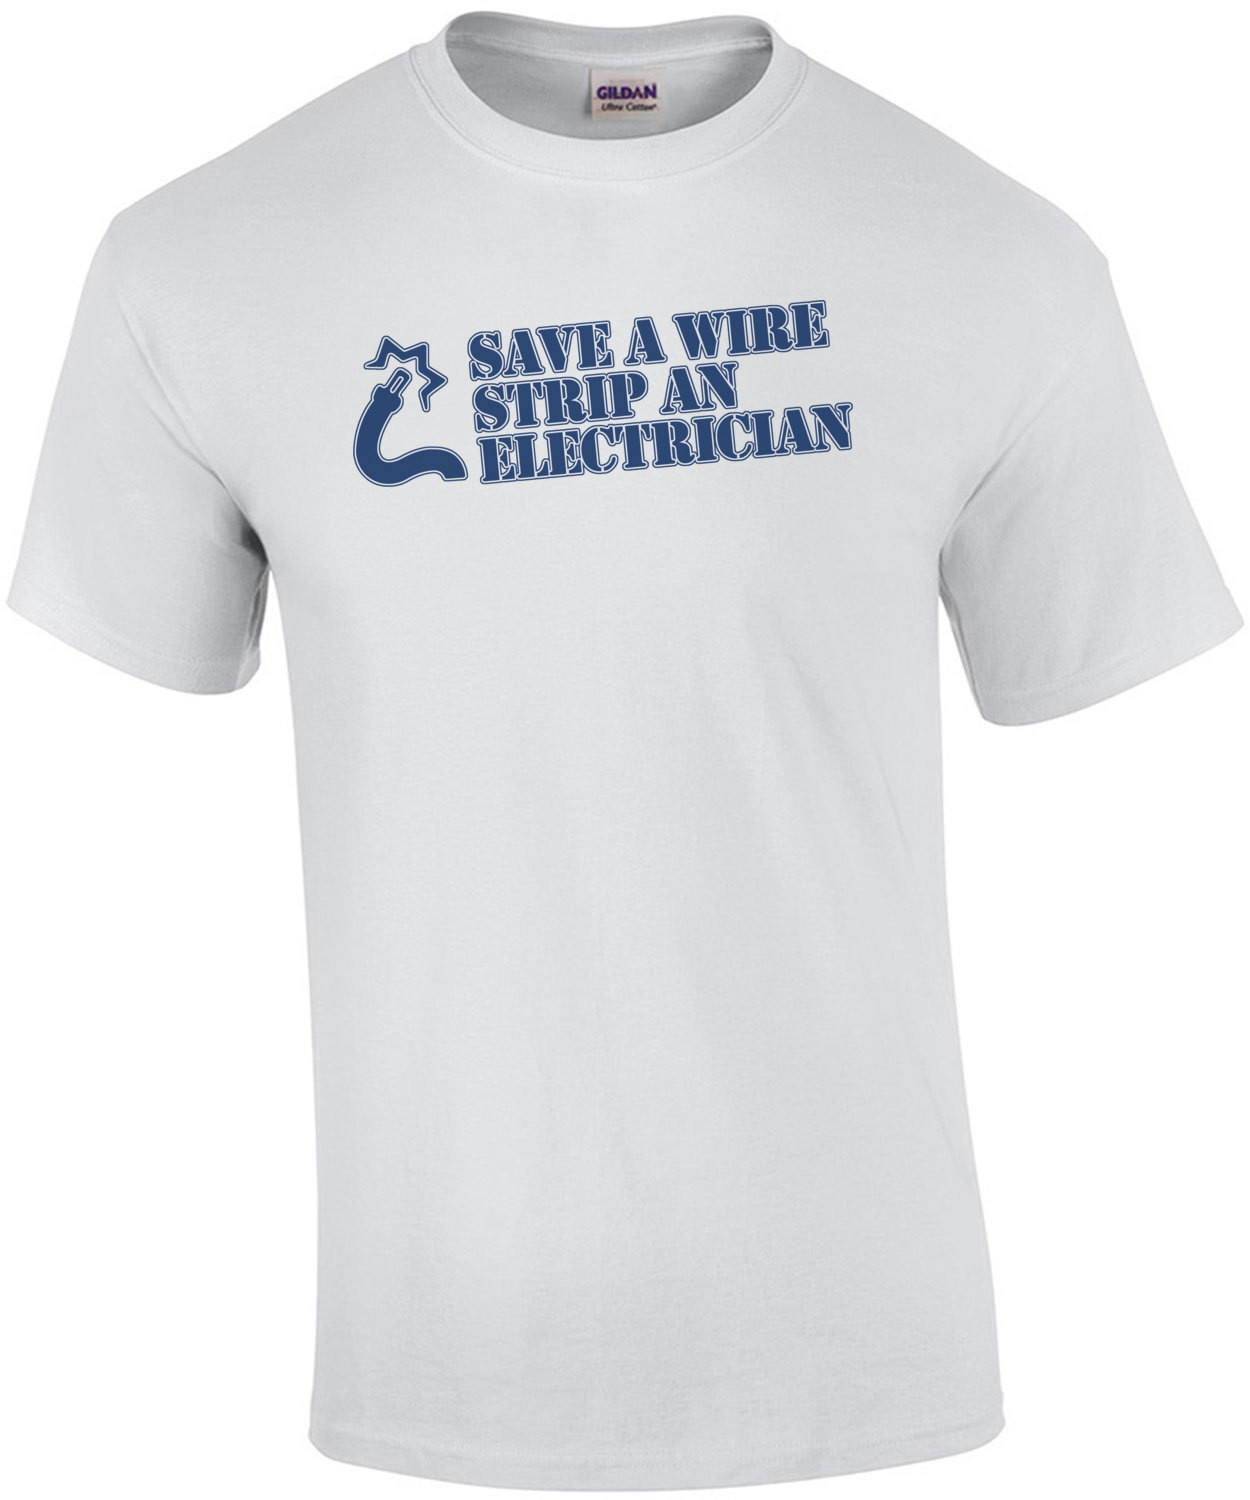 Save A Wire Strip An Electrician T-Shirt